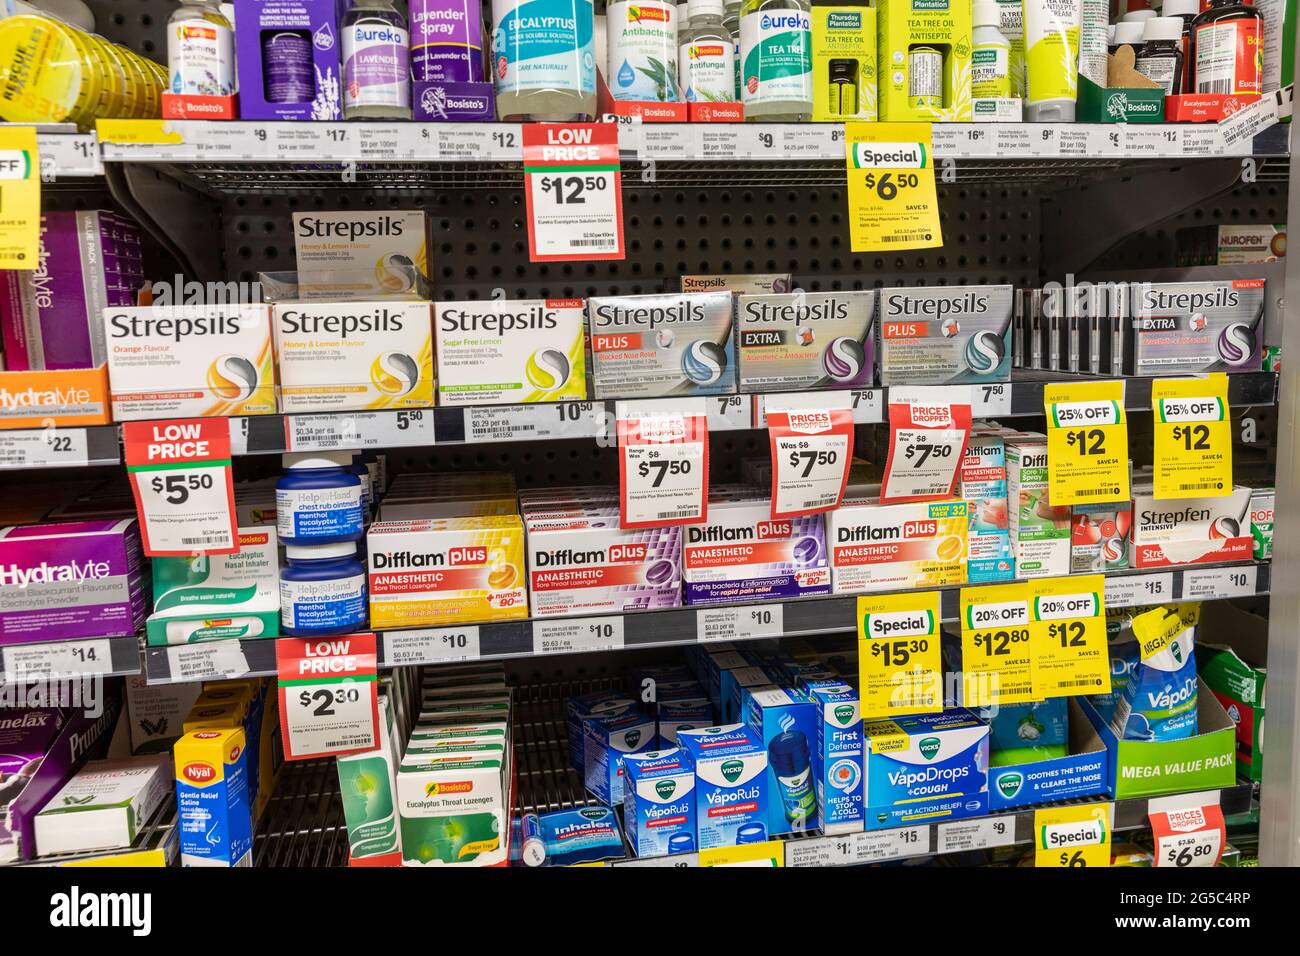 https://c8.alamy.com/comp/2G5C4RP/strepsils-and-difflam-lozenges-and-medicines-for-sale-on-a-supermarket-shelf-in-australia-2G5C4RP.jpg